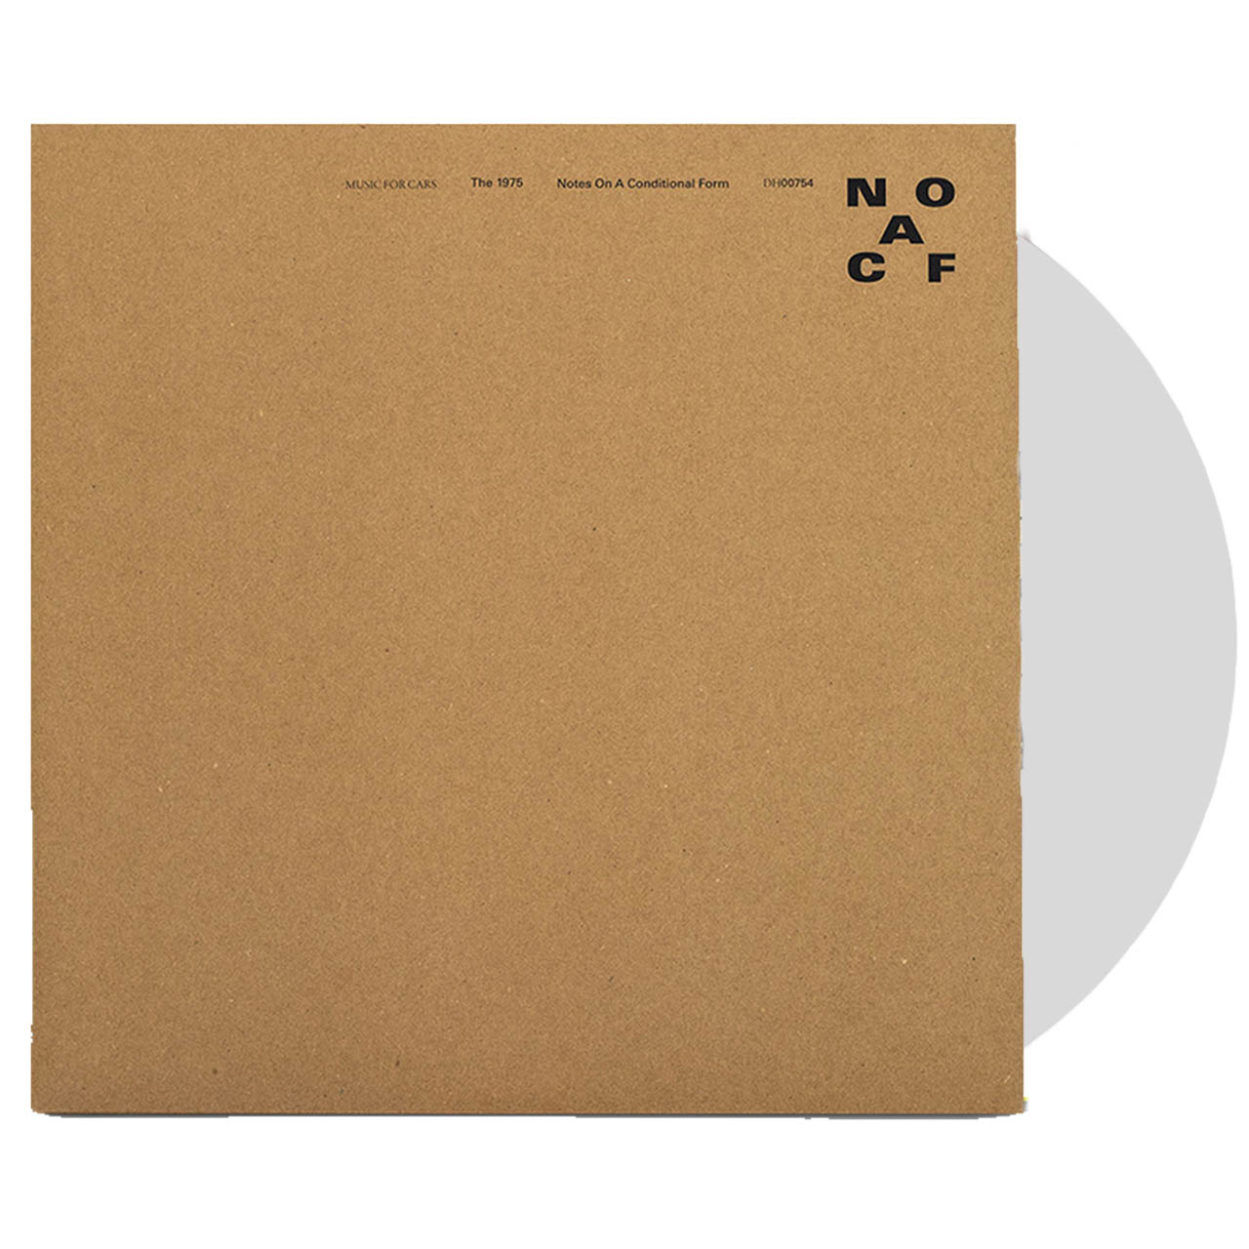 The 1975 Notes On A Conditional Form Vinyl